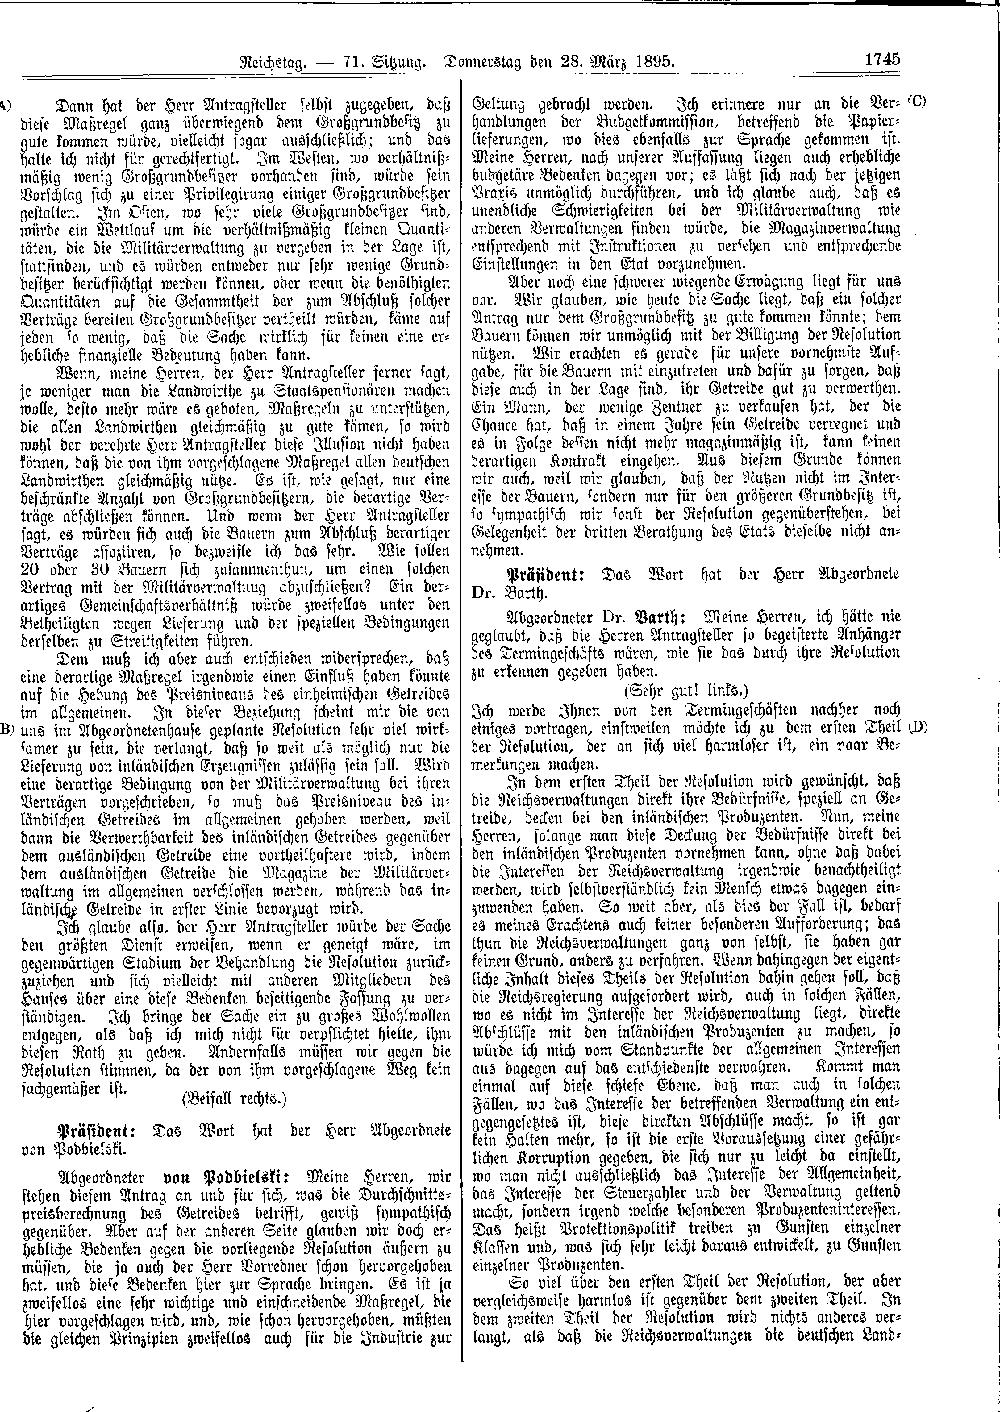 Scan of page 1745